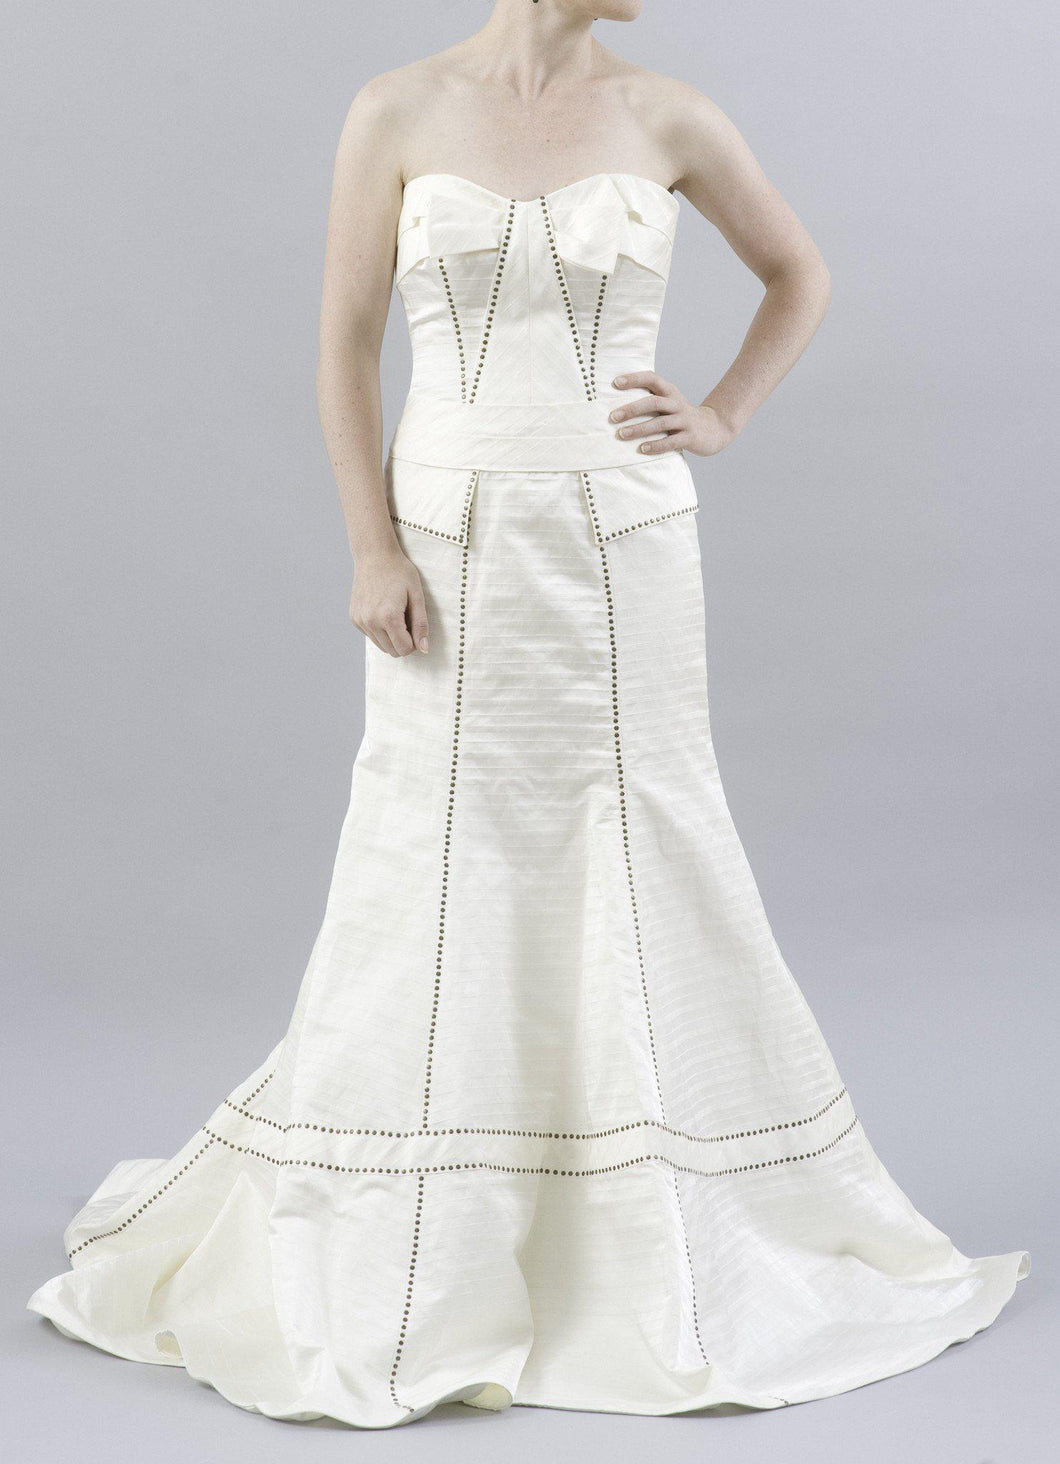 Anne Barge La Fleur LF202 Ivory Silk Gown - Anne Barge - Nearly Newlywed Bridal Boutique - 1